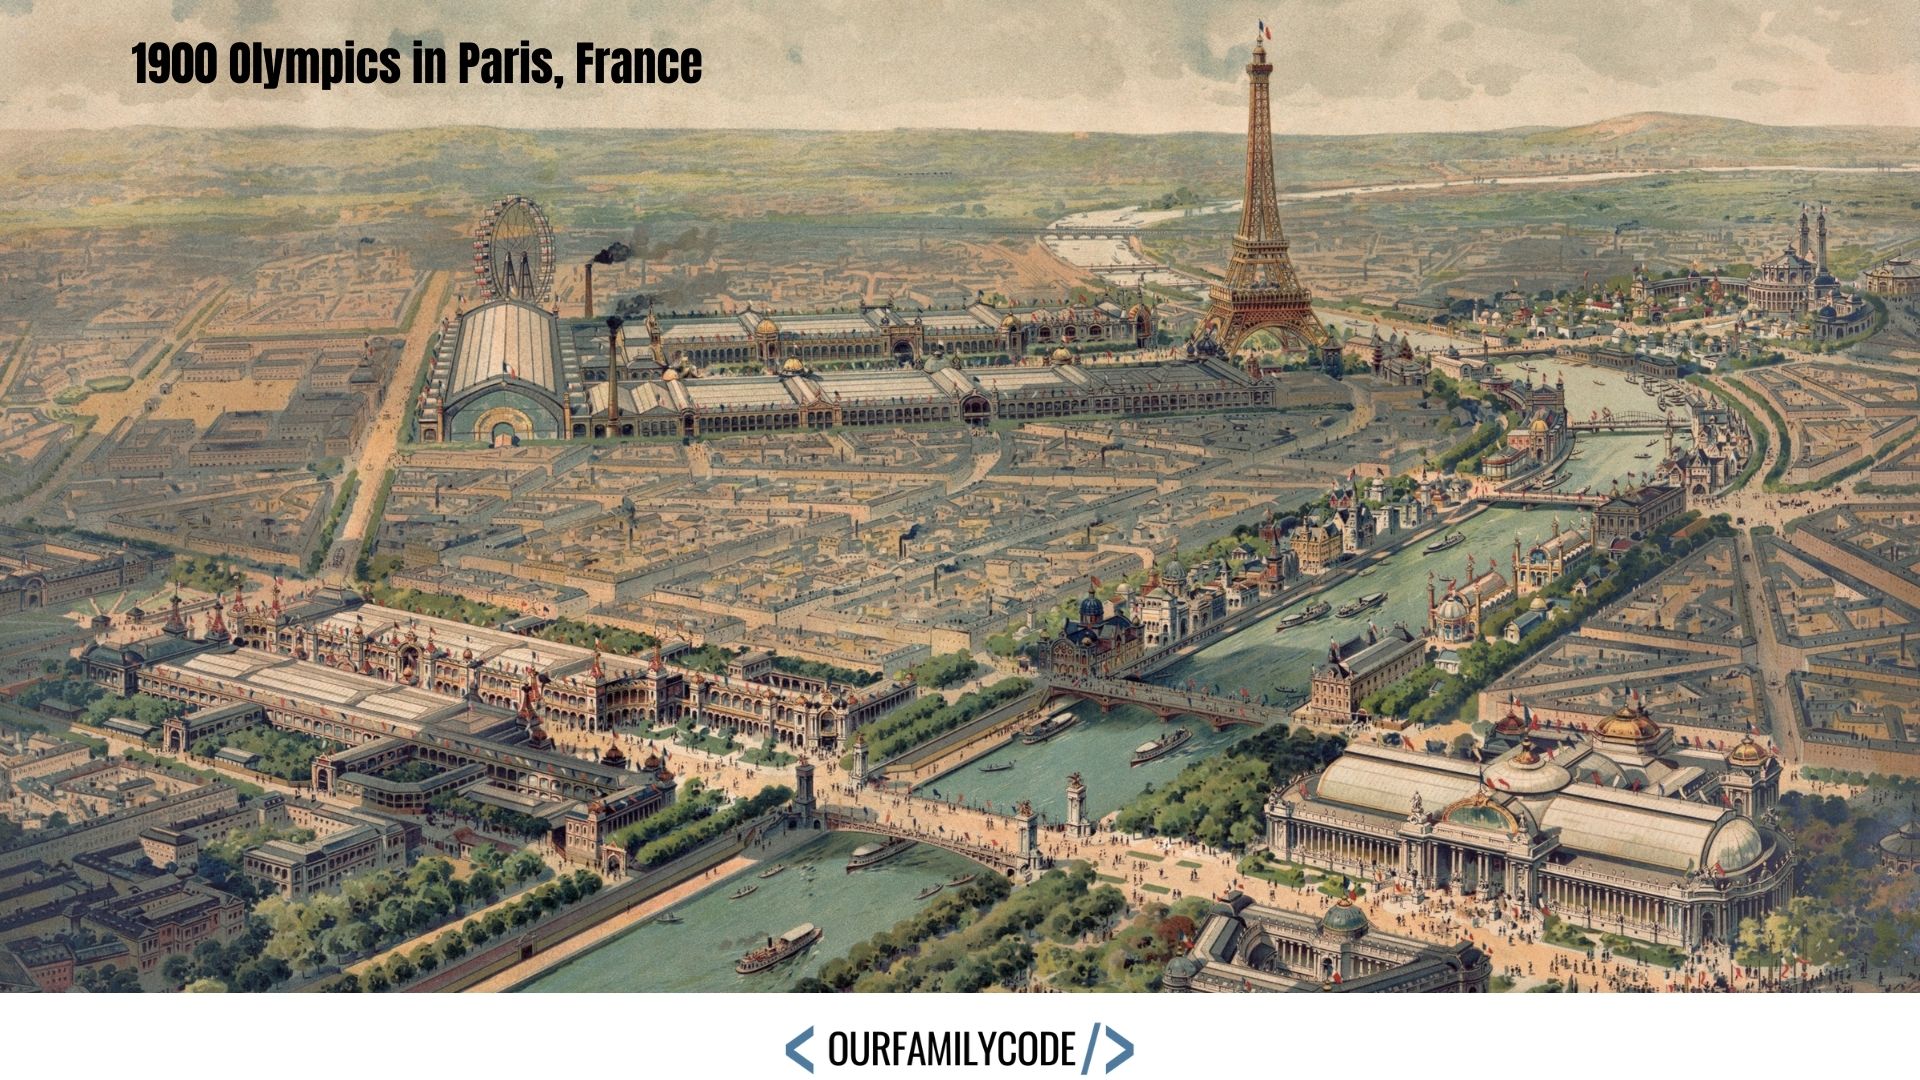 A Panoramic view of the Universal Exposition in Paris in 1900. The Everett Collection.